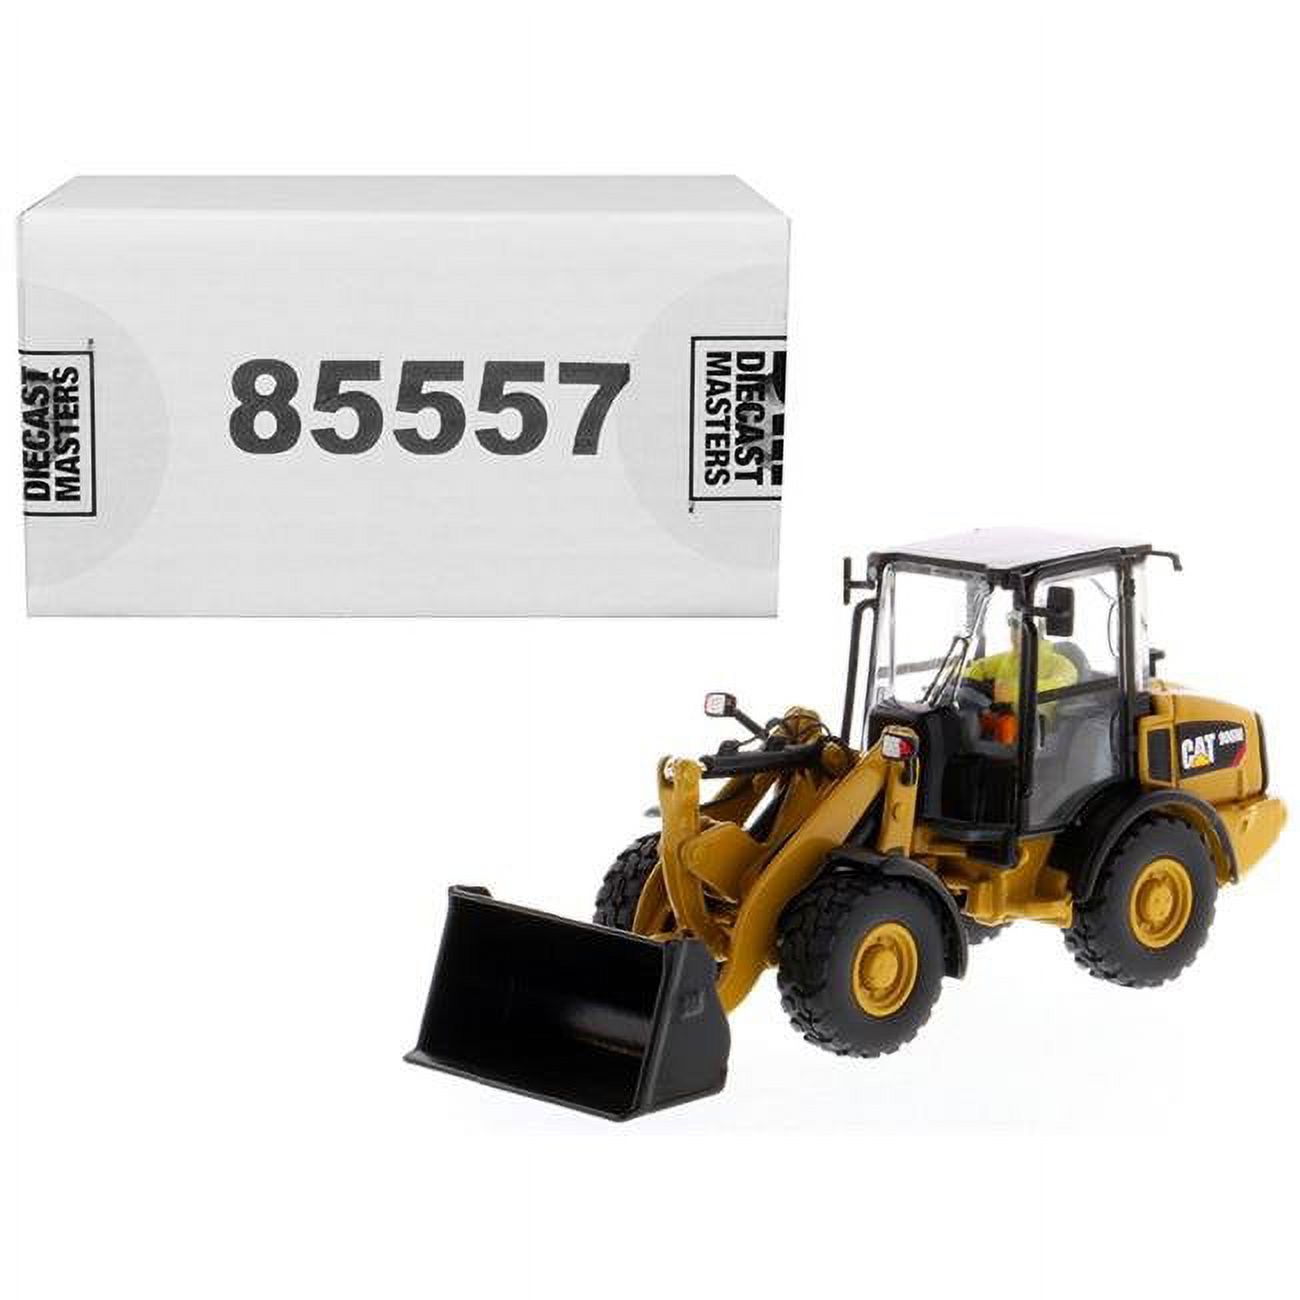 Diecast Masters 85557 1-50 CAT Caterpillar 906M Diecast Model Compact Wheel Loader with Operator - image 1 of 4